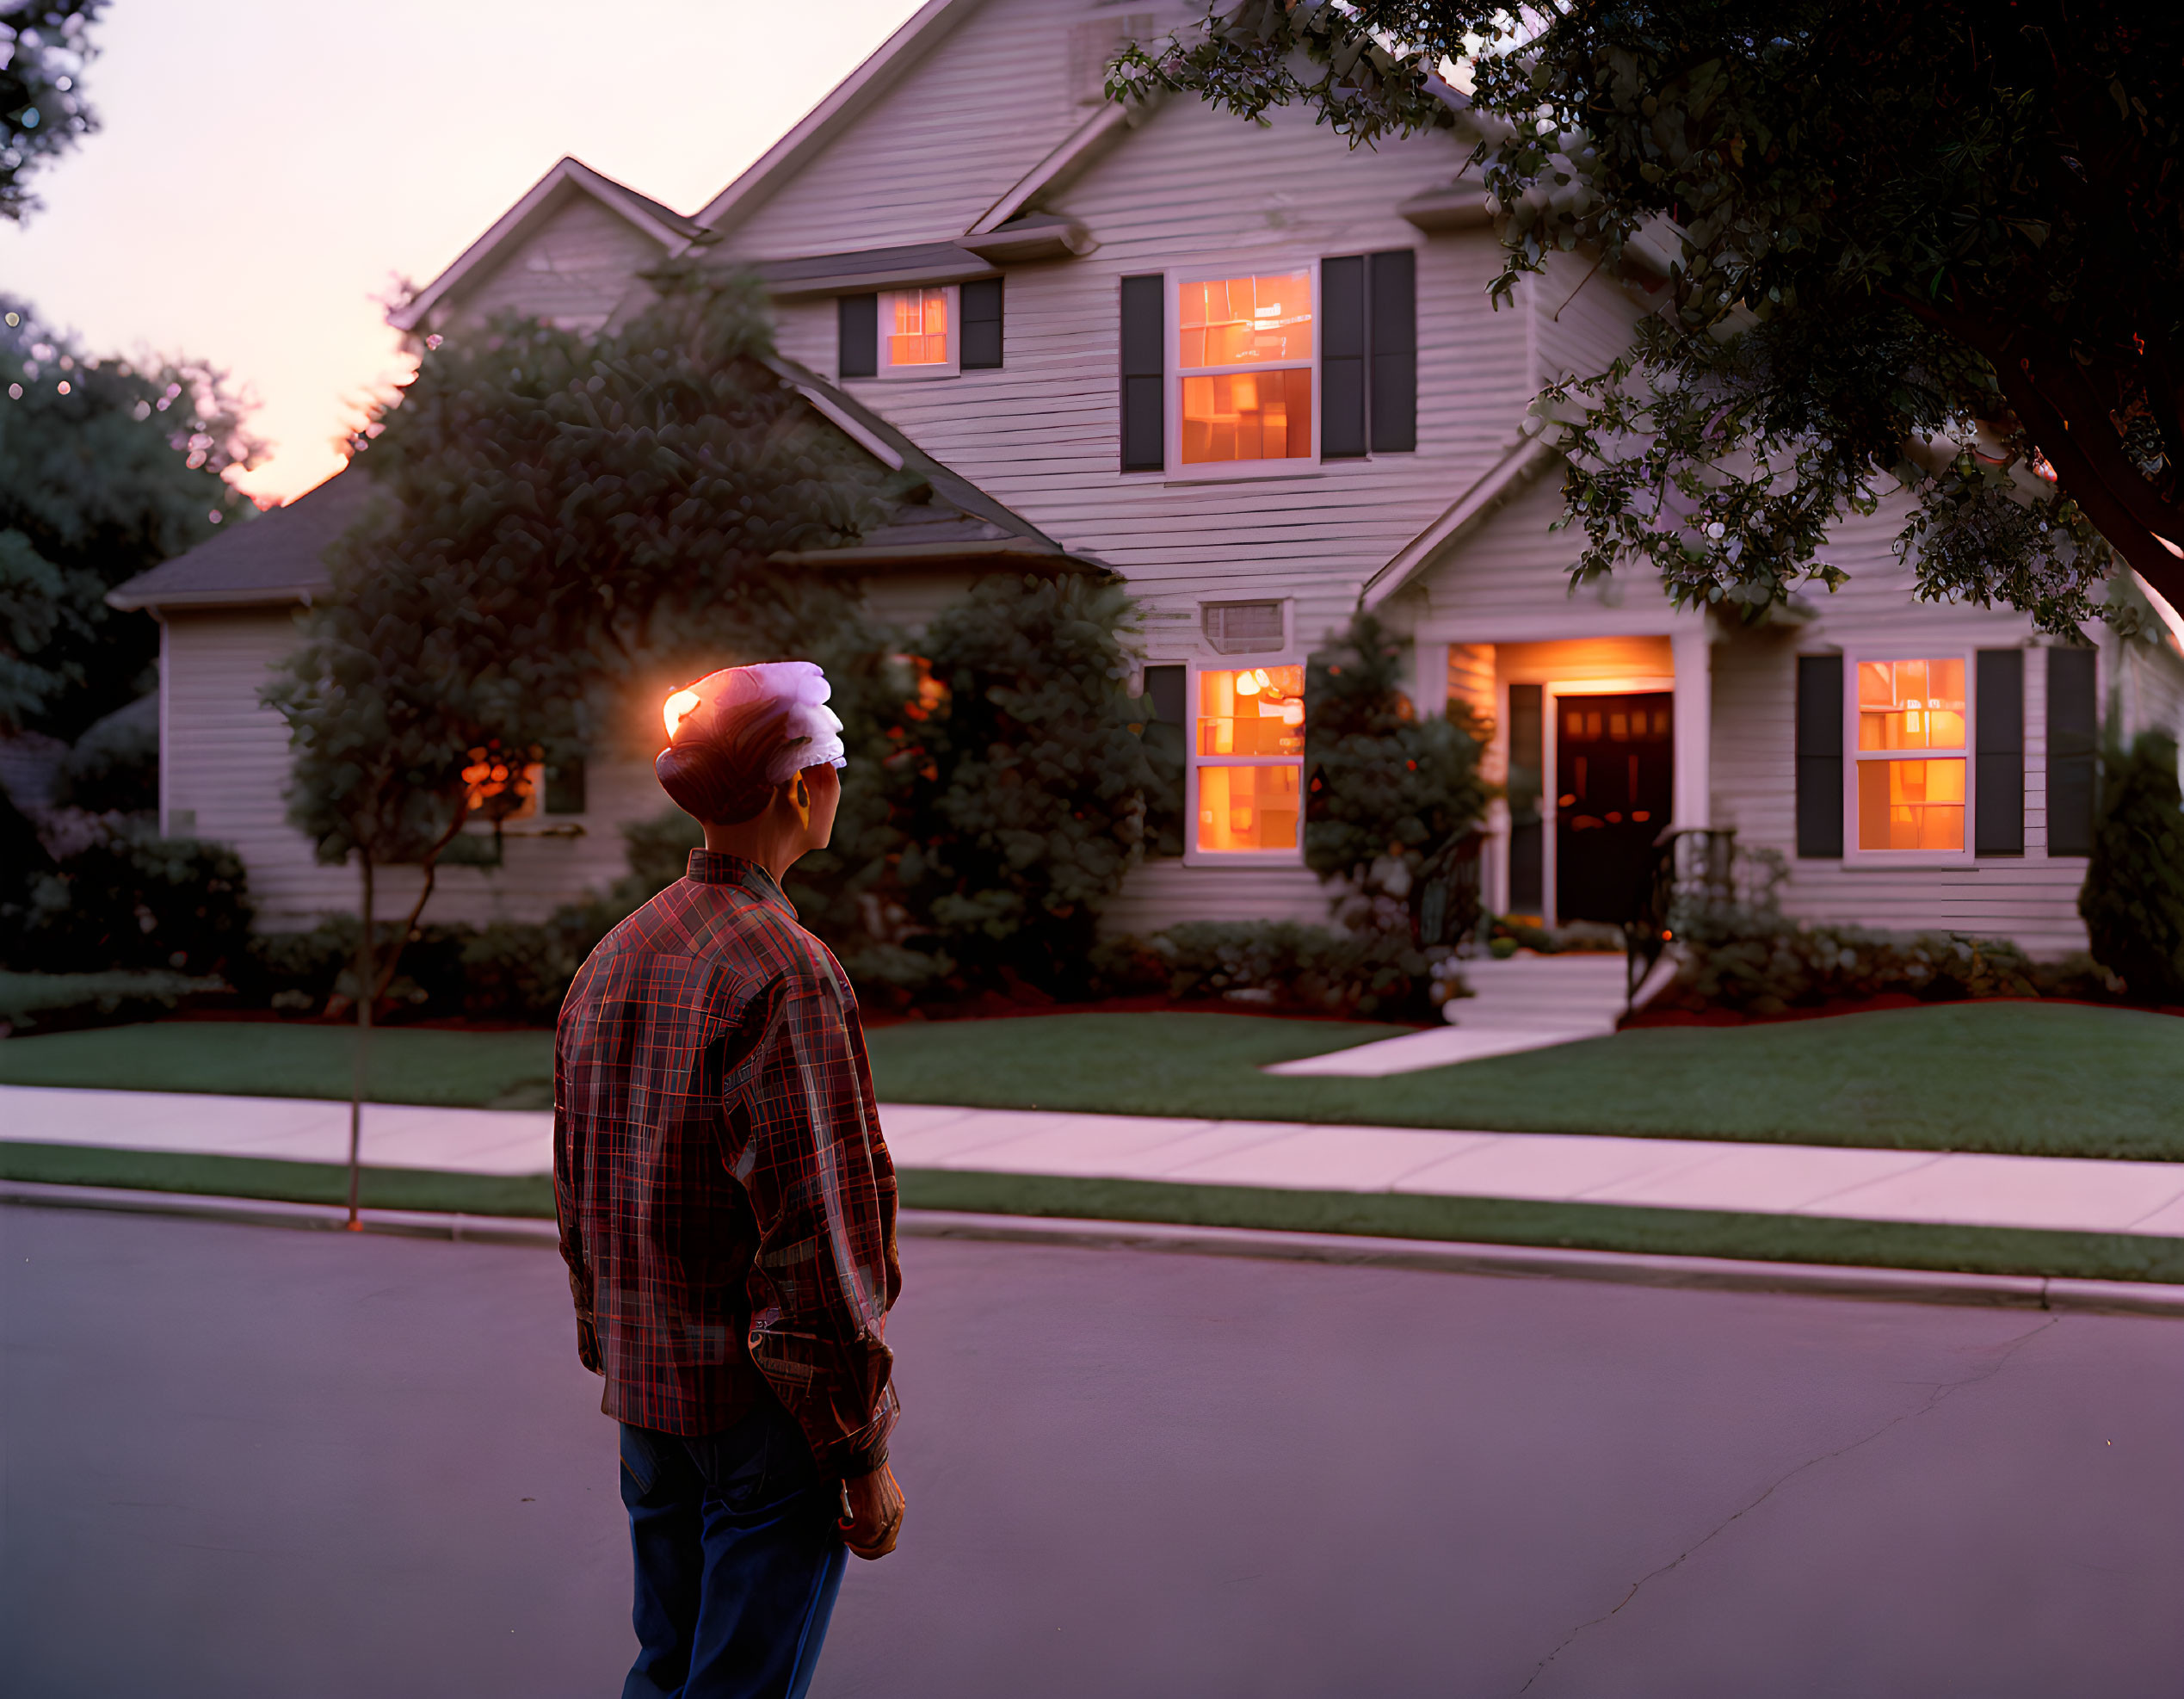 Man in Plaid Shirt Standing by Two-Story House at Dusk